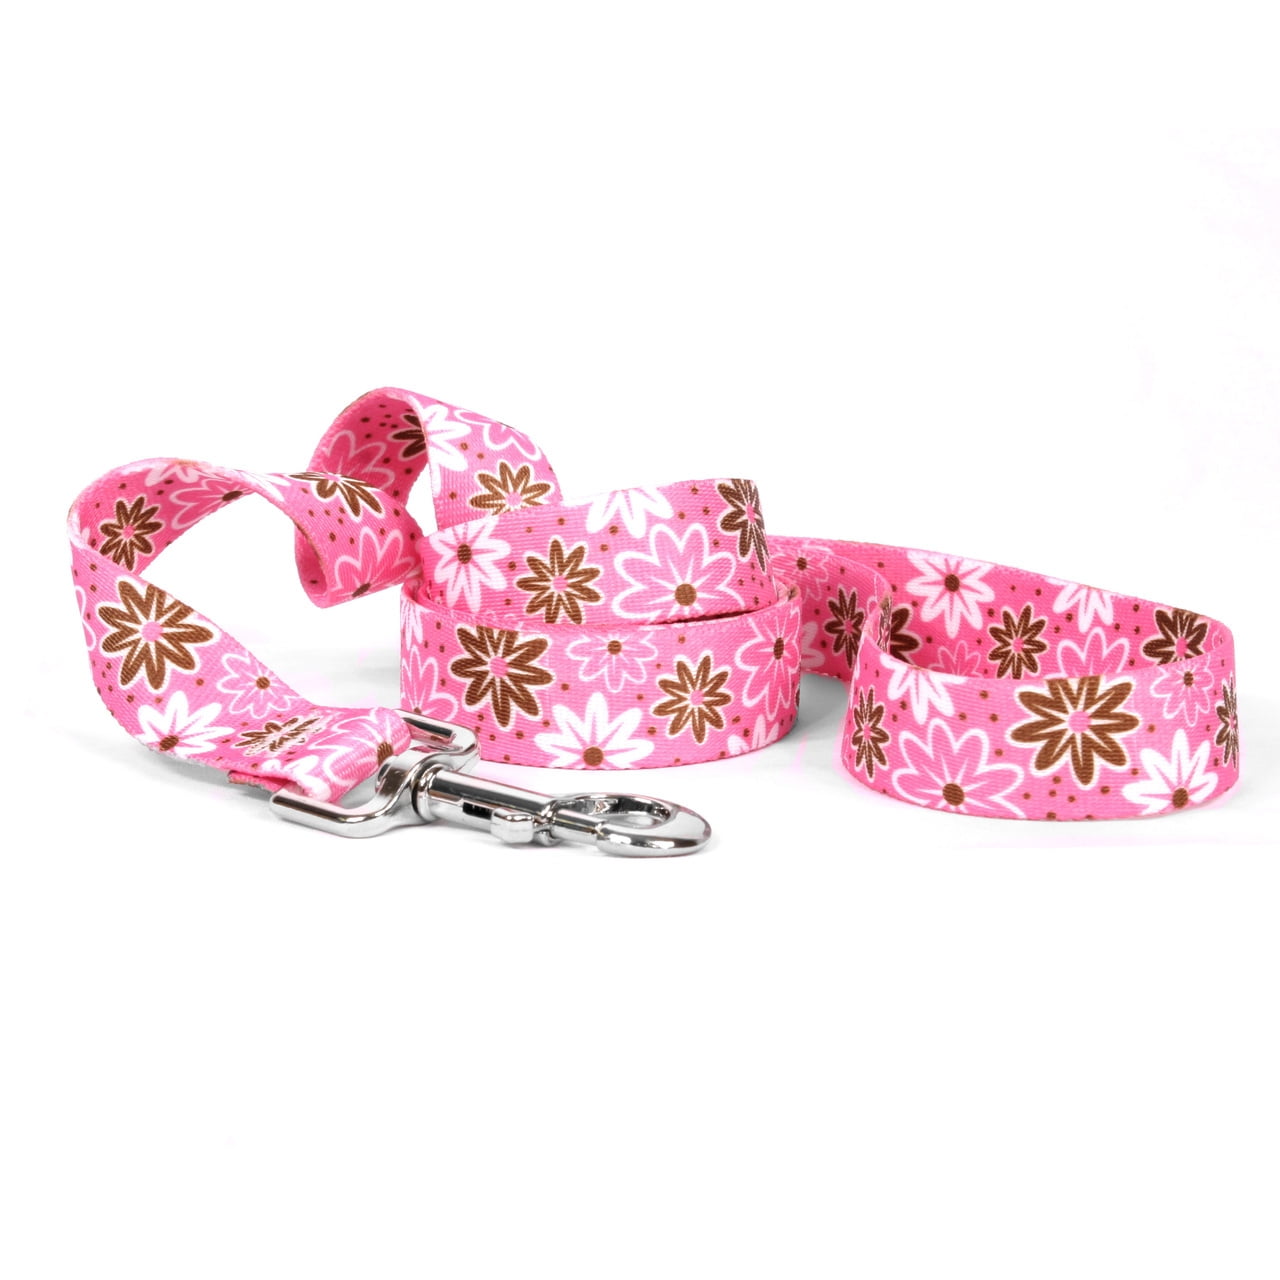 Pink Daisies 6 ft Pre-Made Paracord Dog Leash/ Puppy Leash Animal Lead